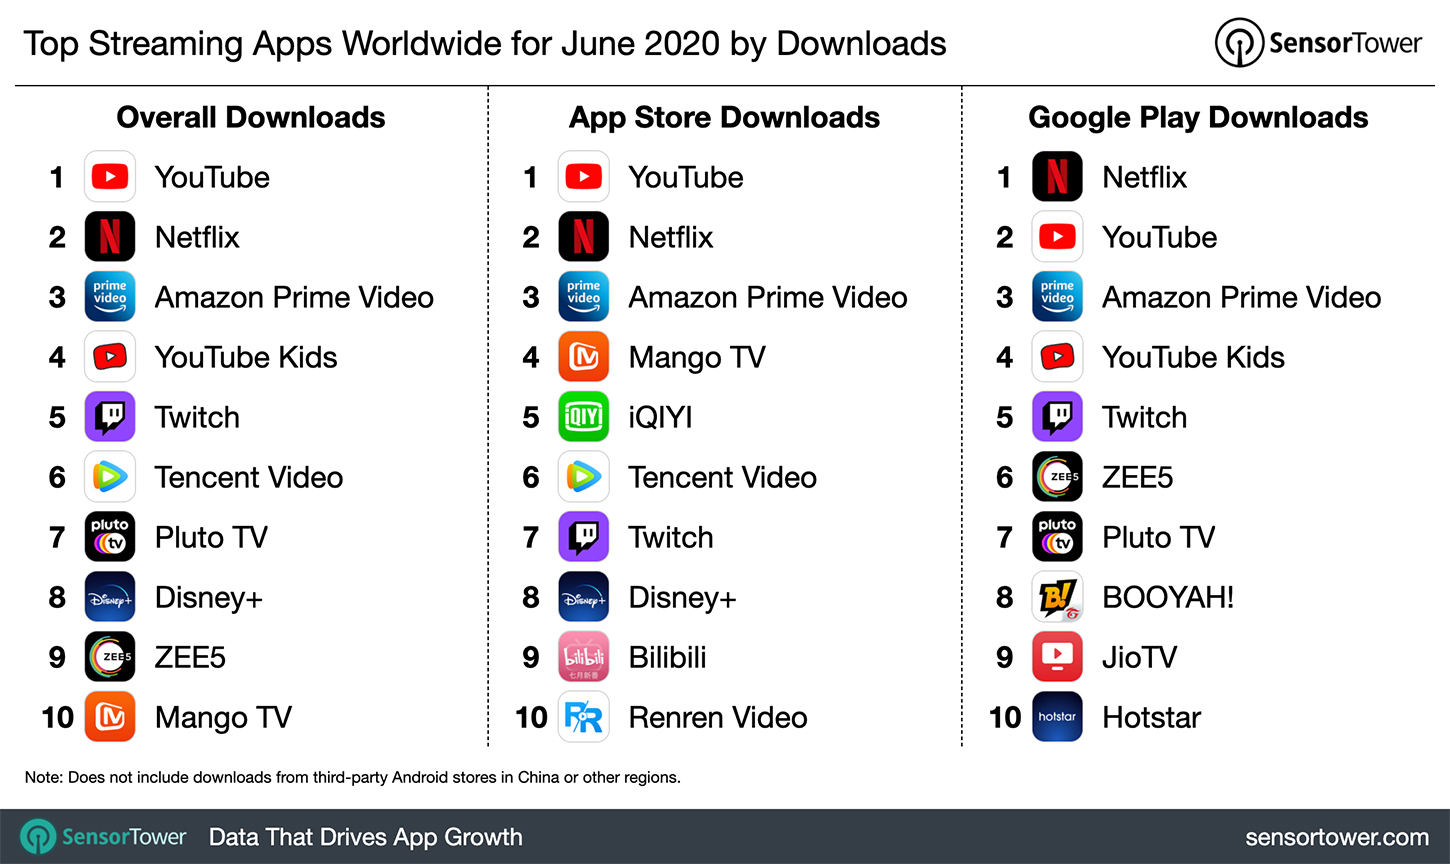 Top Streaming Apps Worldwide for June 2020 by Downloads